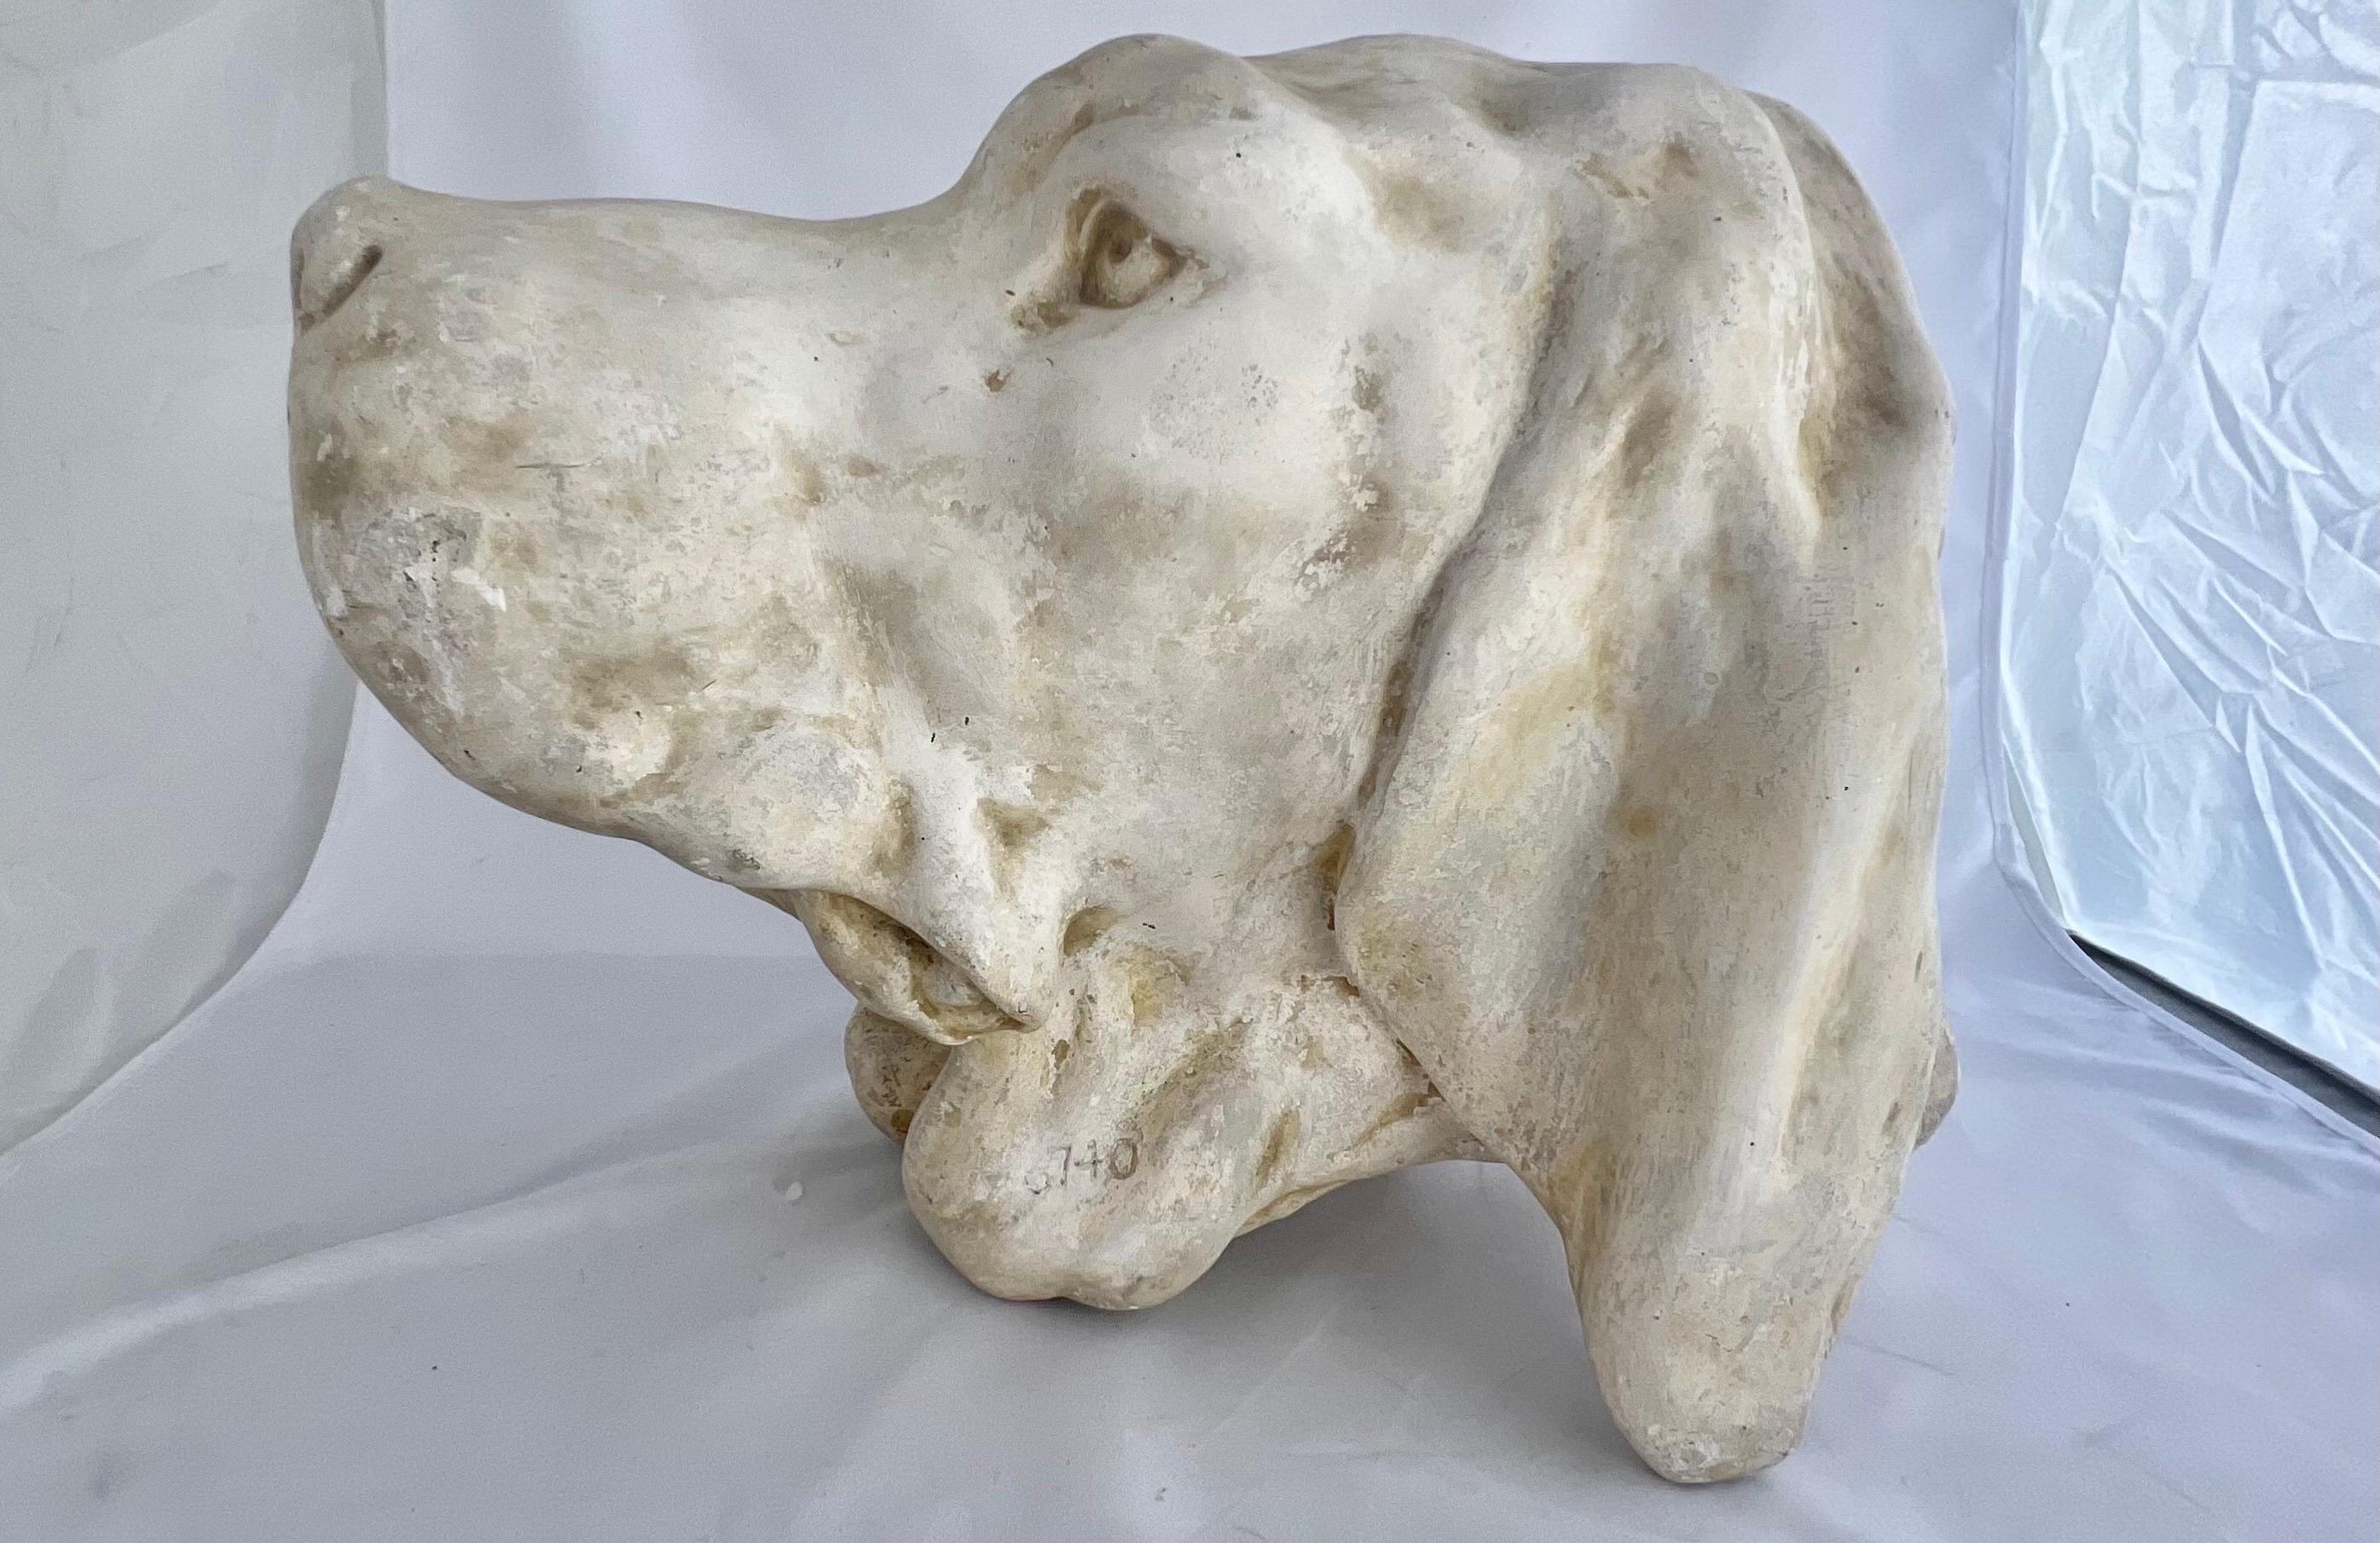 Other Oringinal Casting of a Pointer, Early 1900s by P.P. Caproni Bros of Boston